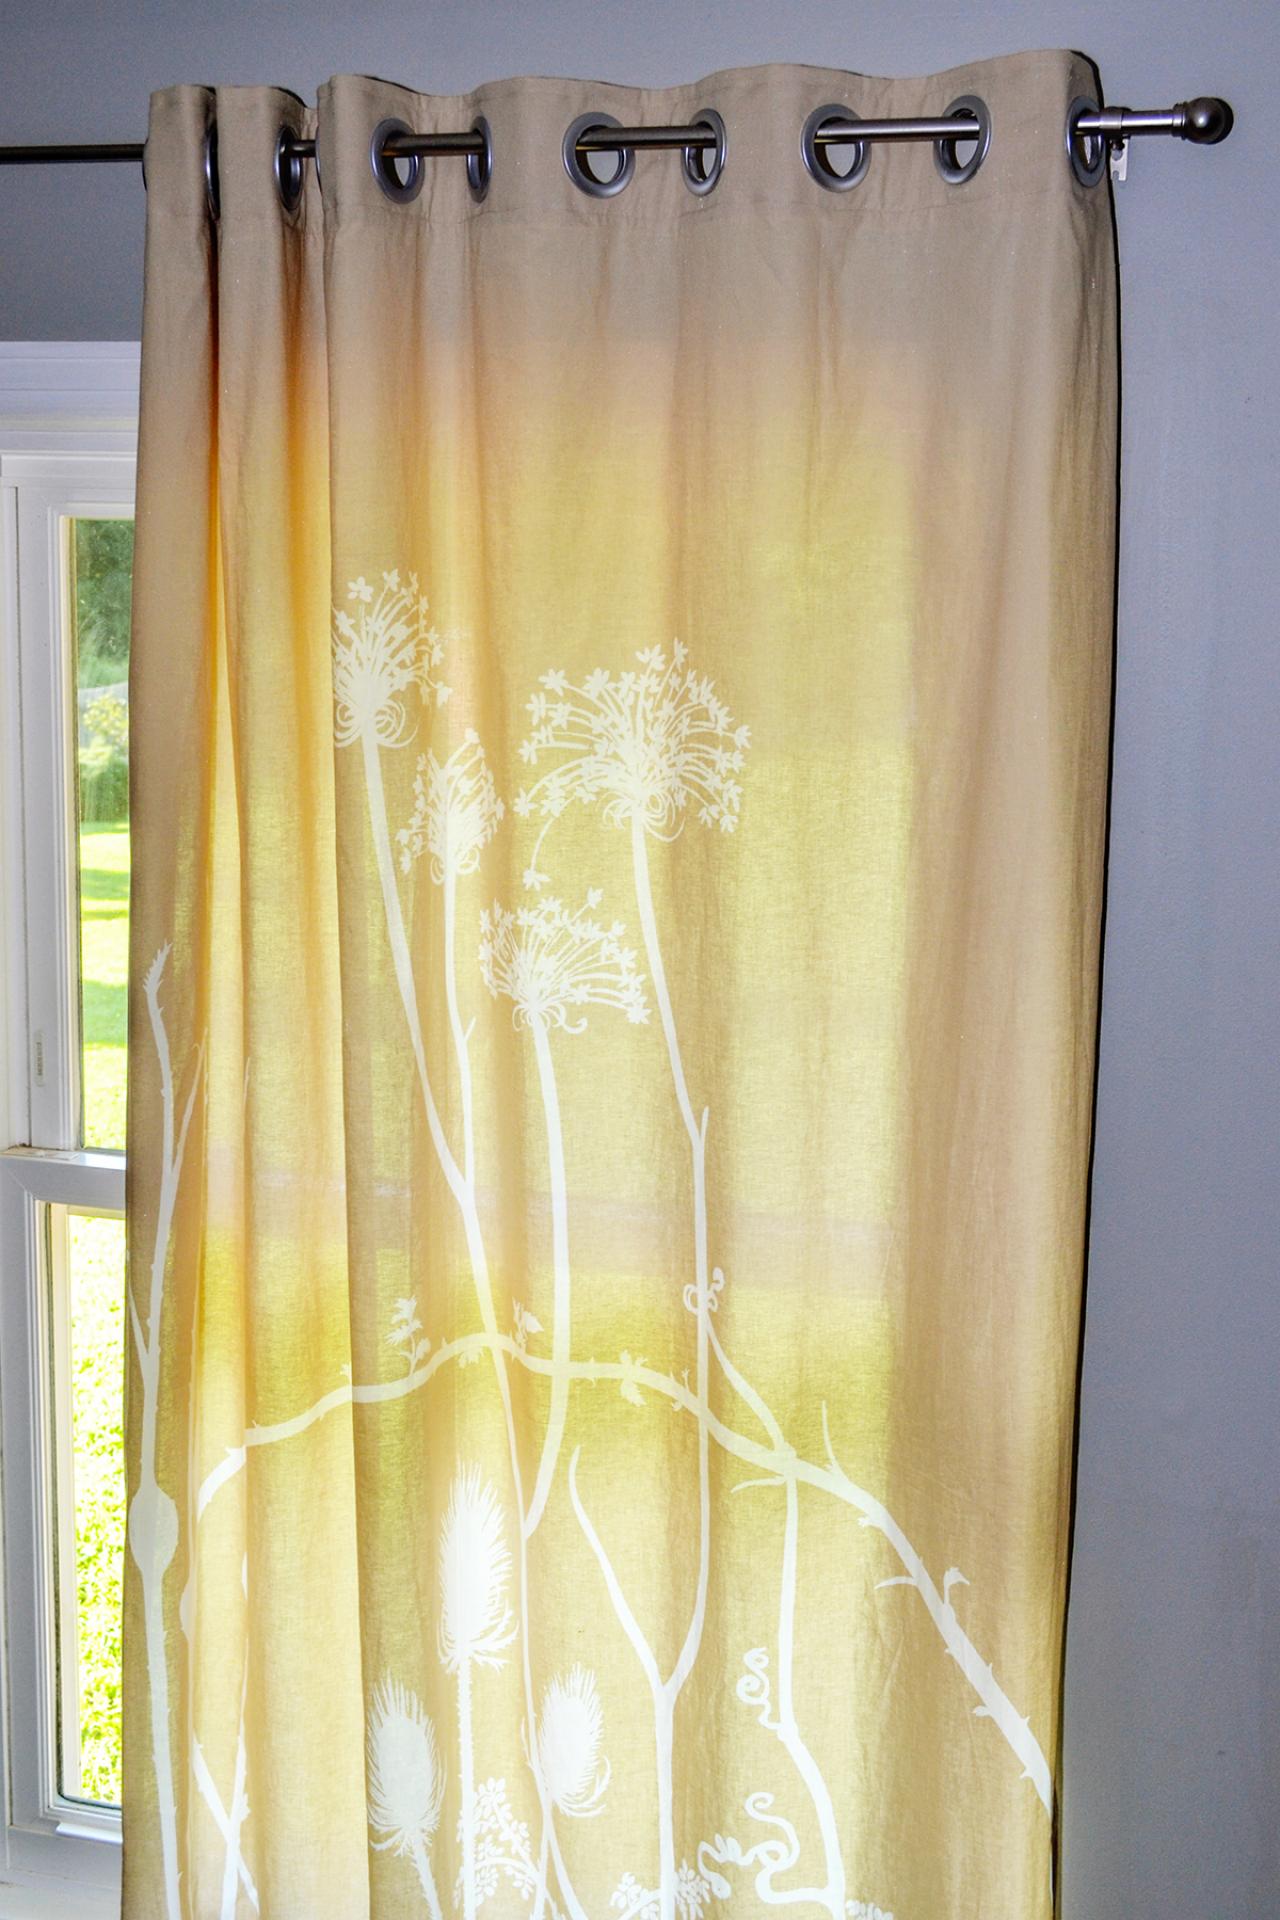 How To Hide Grommets On Curtains How to Make Grommet Curtains | HGTV